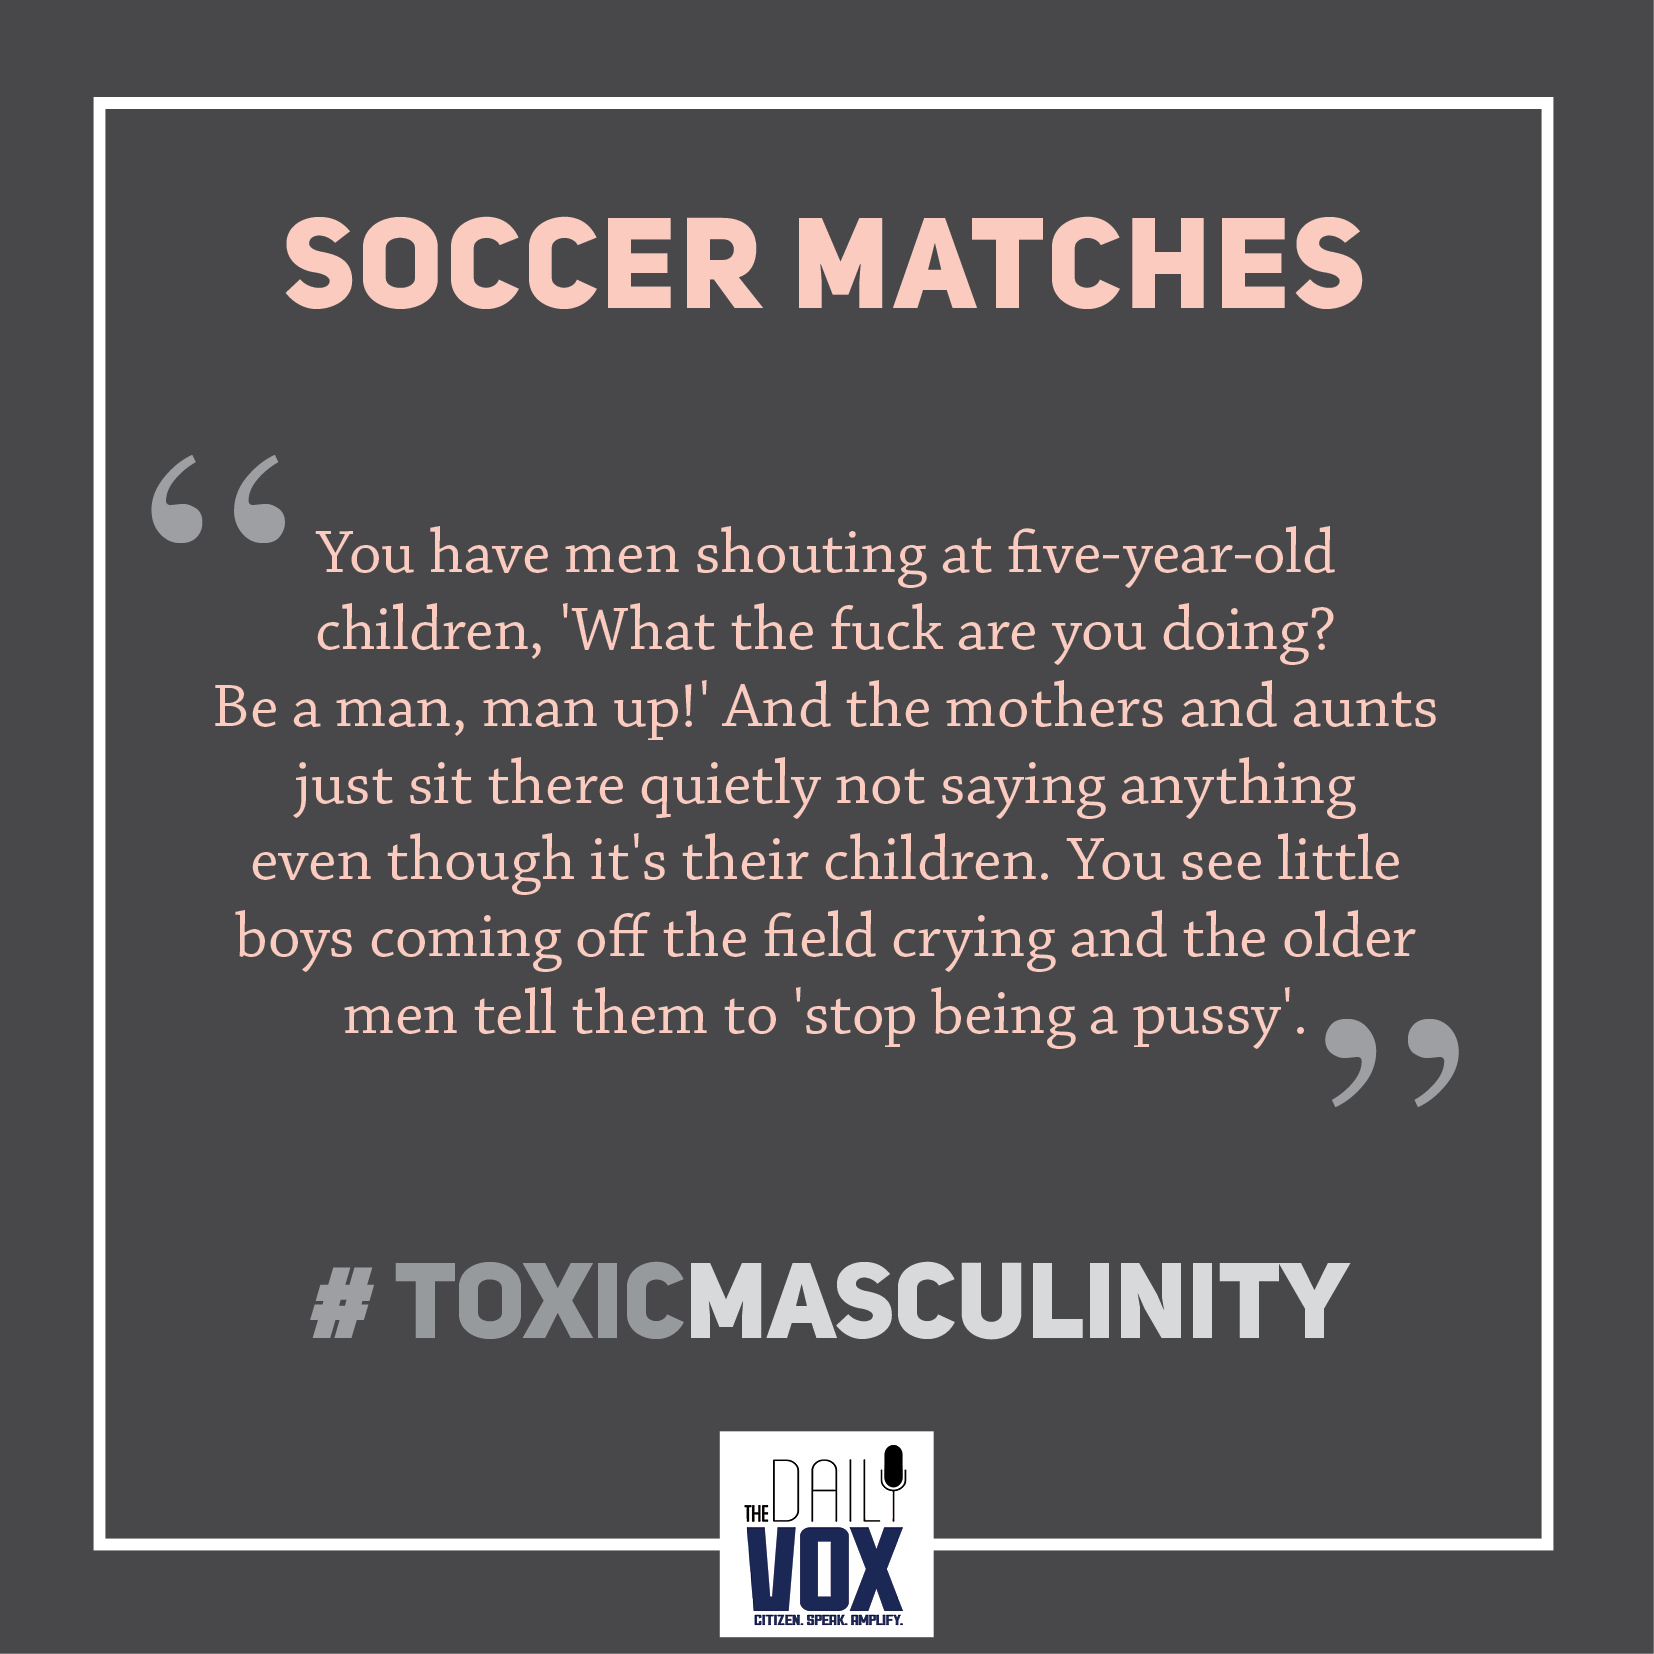 toxic masculinity soccer matches sexism